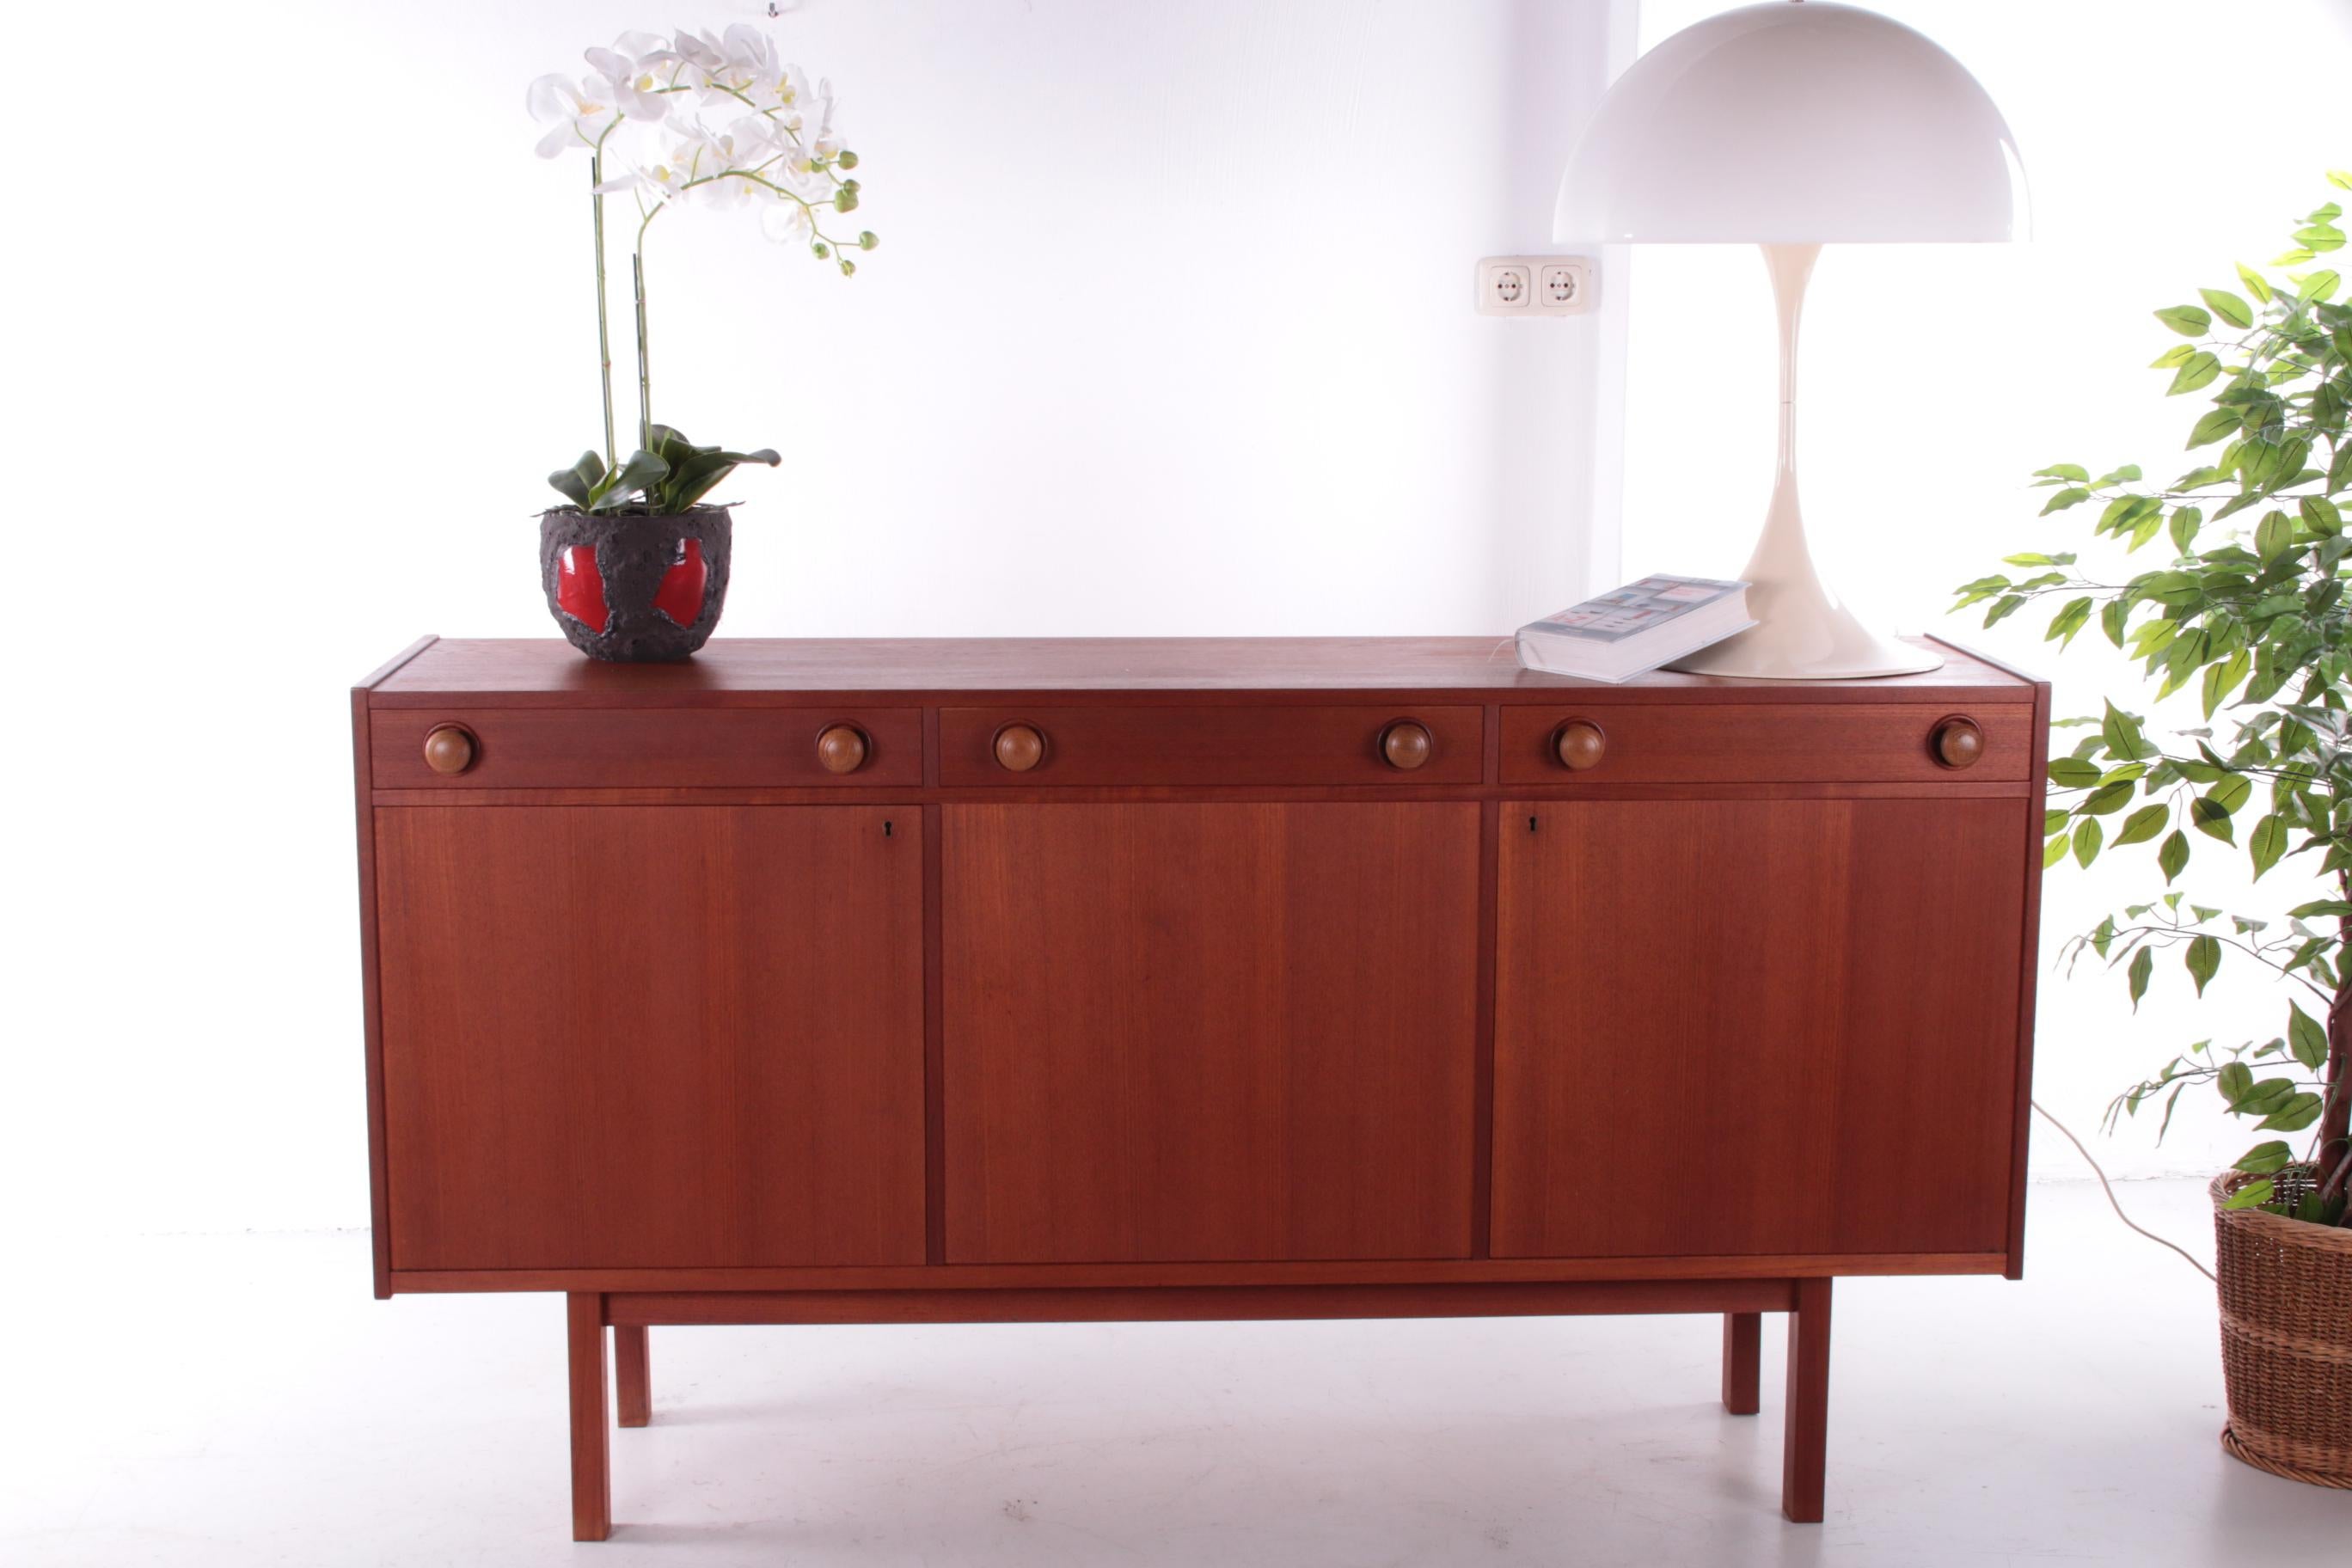 Beautiful Vintage Sideboard made in Sweden at Breox, 1960


Teak sideboard marked Breox with three doors and drawers. Interior decorated with white shelves.

Beautiful Vintage Sideboard made in Sweden at Breox, 1960.

Made of teak, the 2